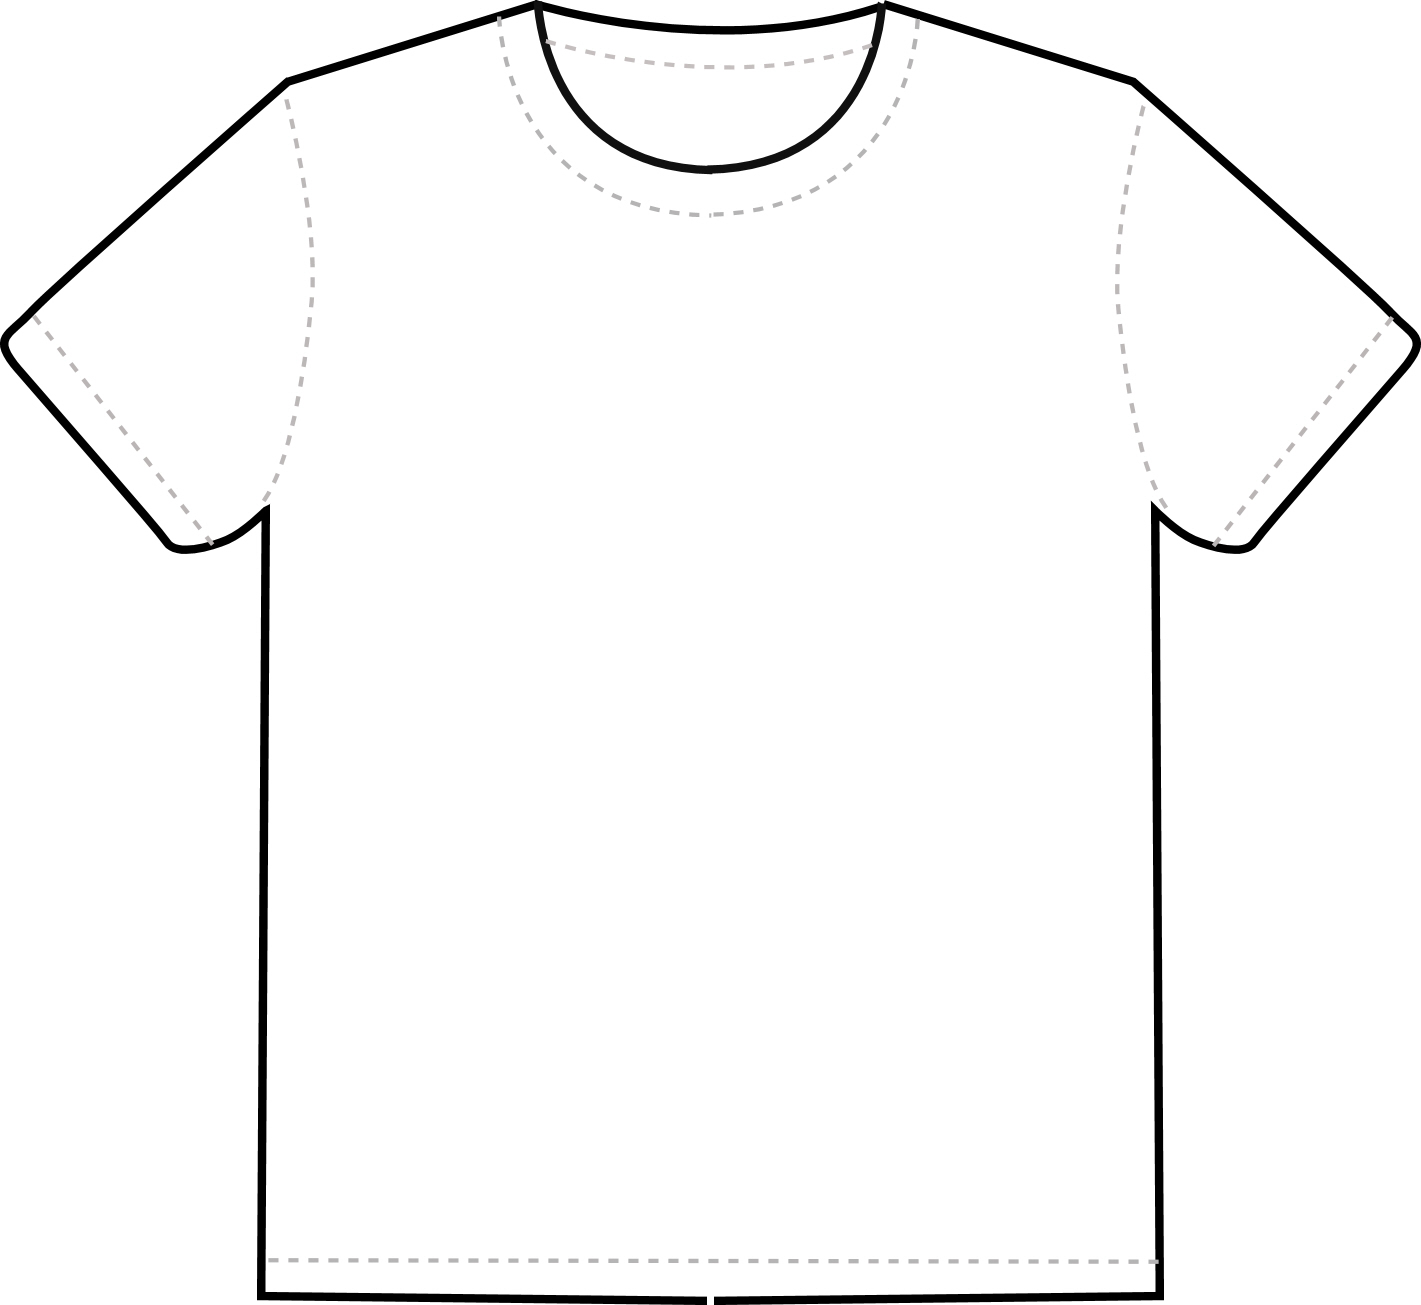 Design Templates For Shirts